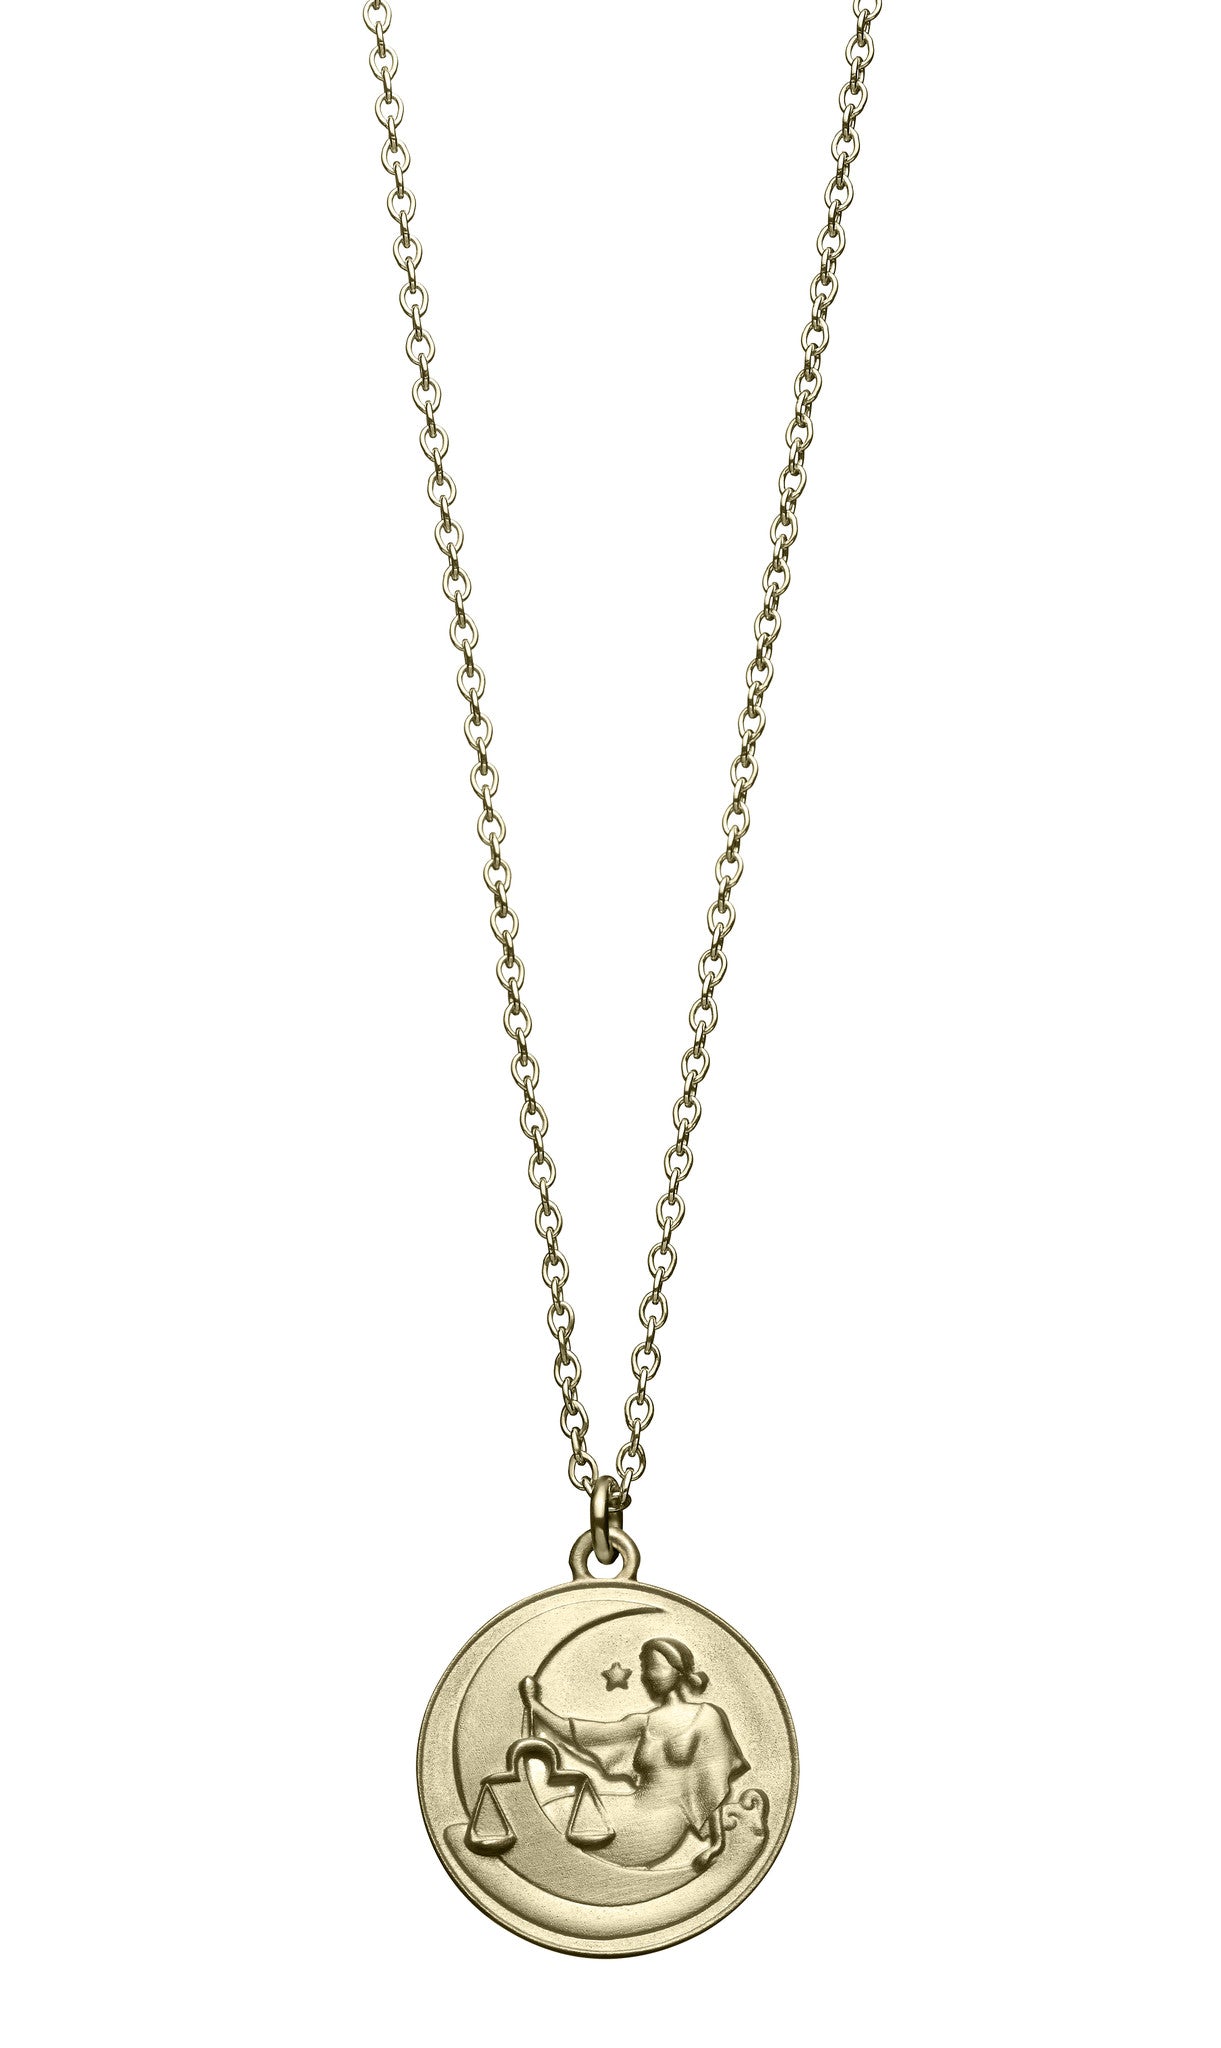 astrology sign libra vintage 10k gold pendent on long chain necklace by finn by candice pool neistat